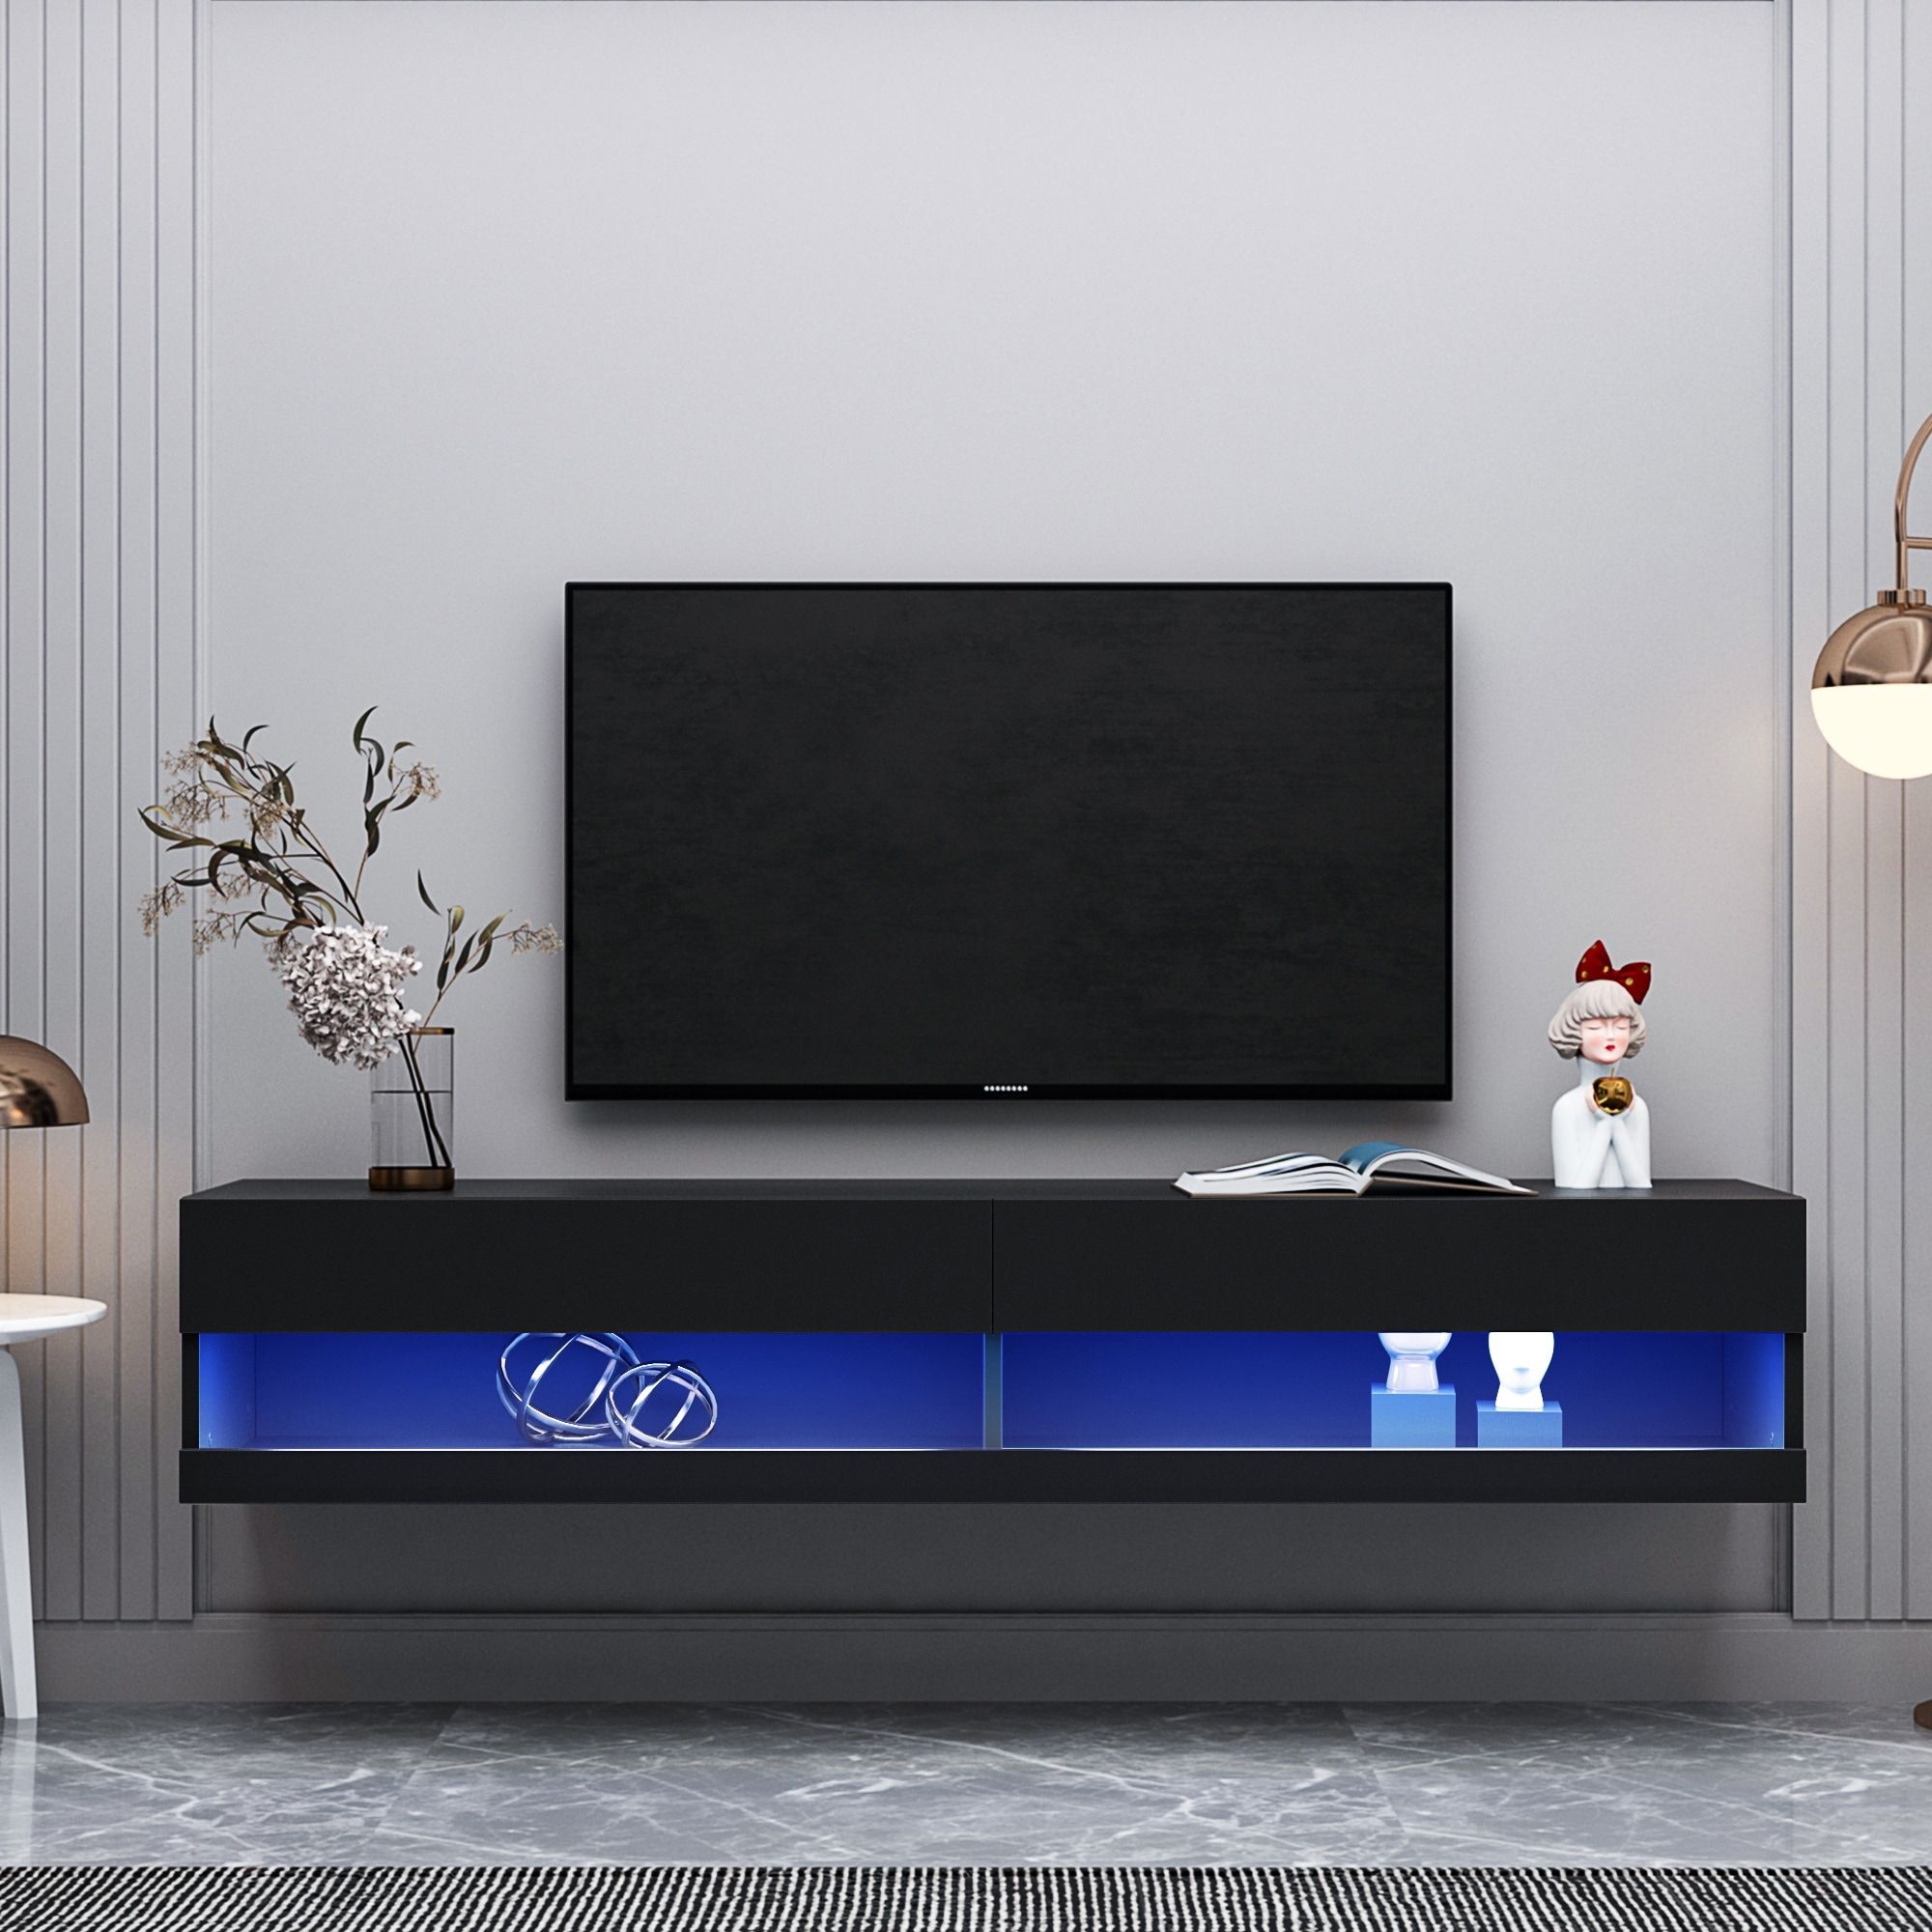 Wall Mounted Floating Tv Stand With Led Lights And Storage Compartments –  Bed Bath & Beyond – 38286386 Throughout Wall Mounted Floating Tv Stands (Photo 10 of 15)